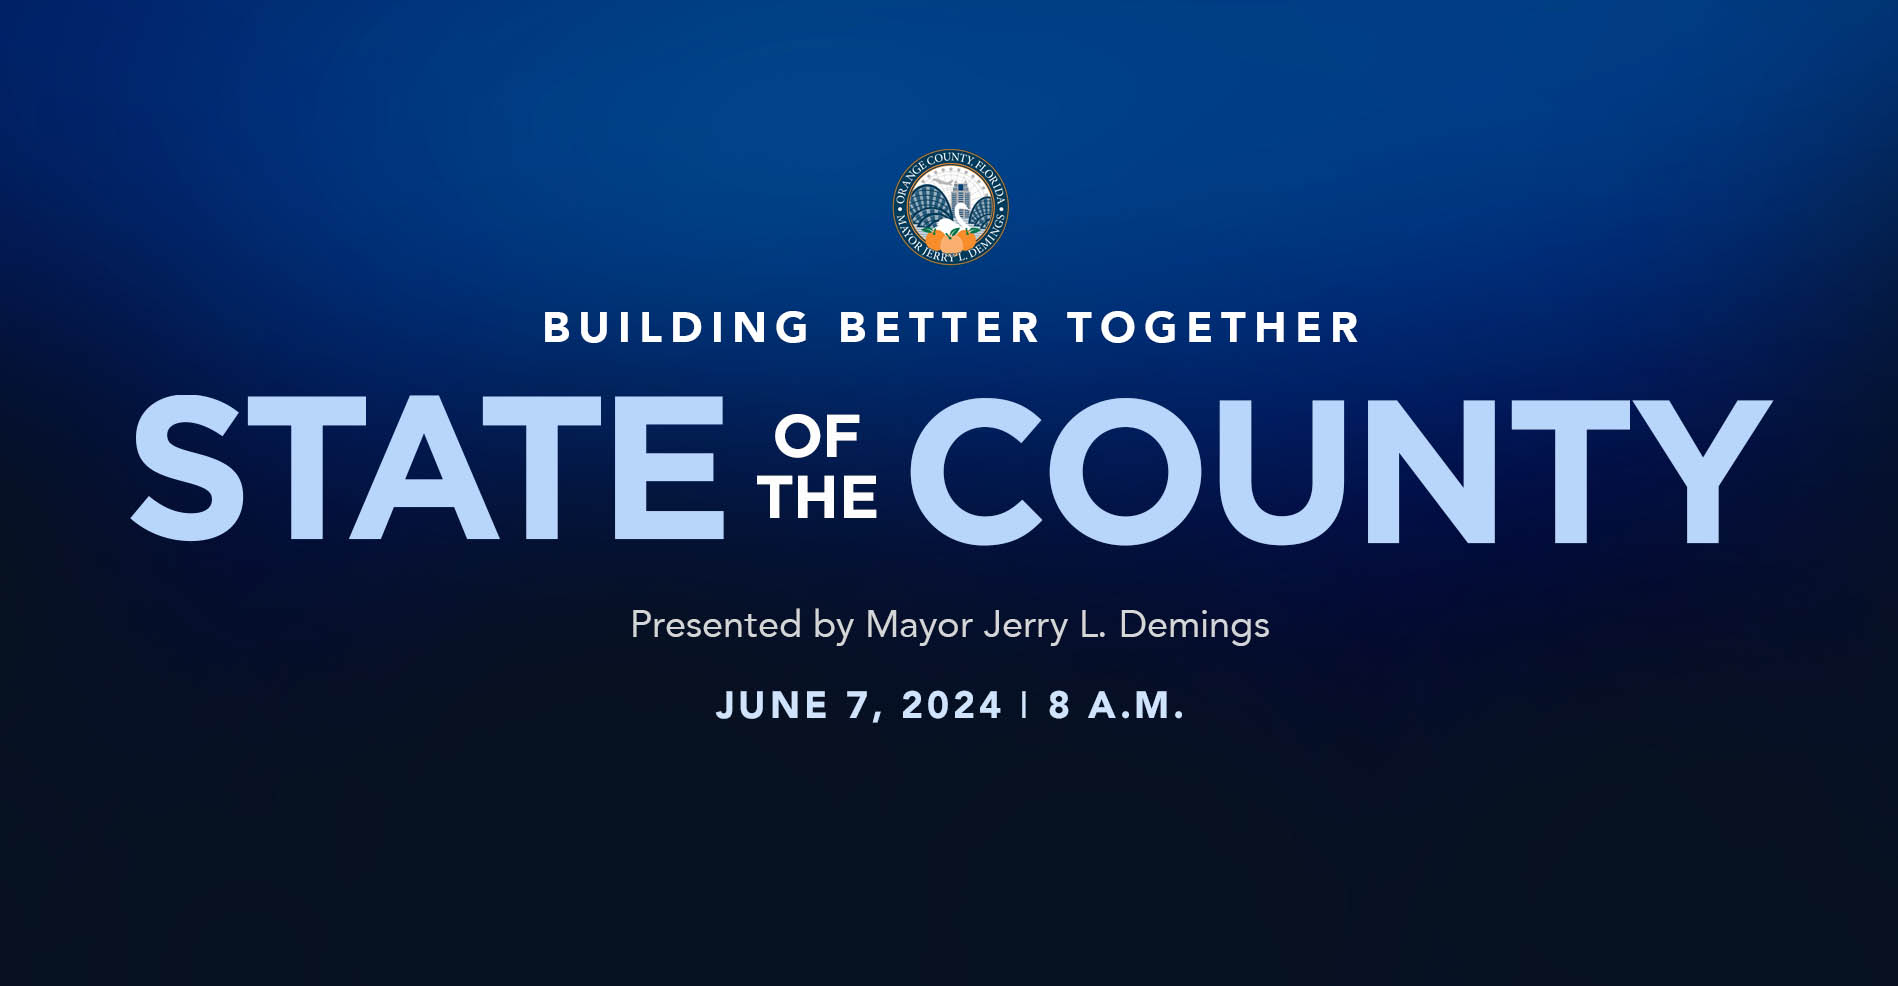 State of the County - Building Better Together - Presented by Mayor Jerry L. Demings - June 7, 2024 at 8 a.m.